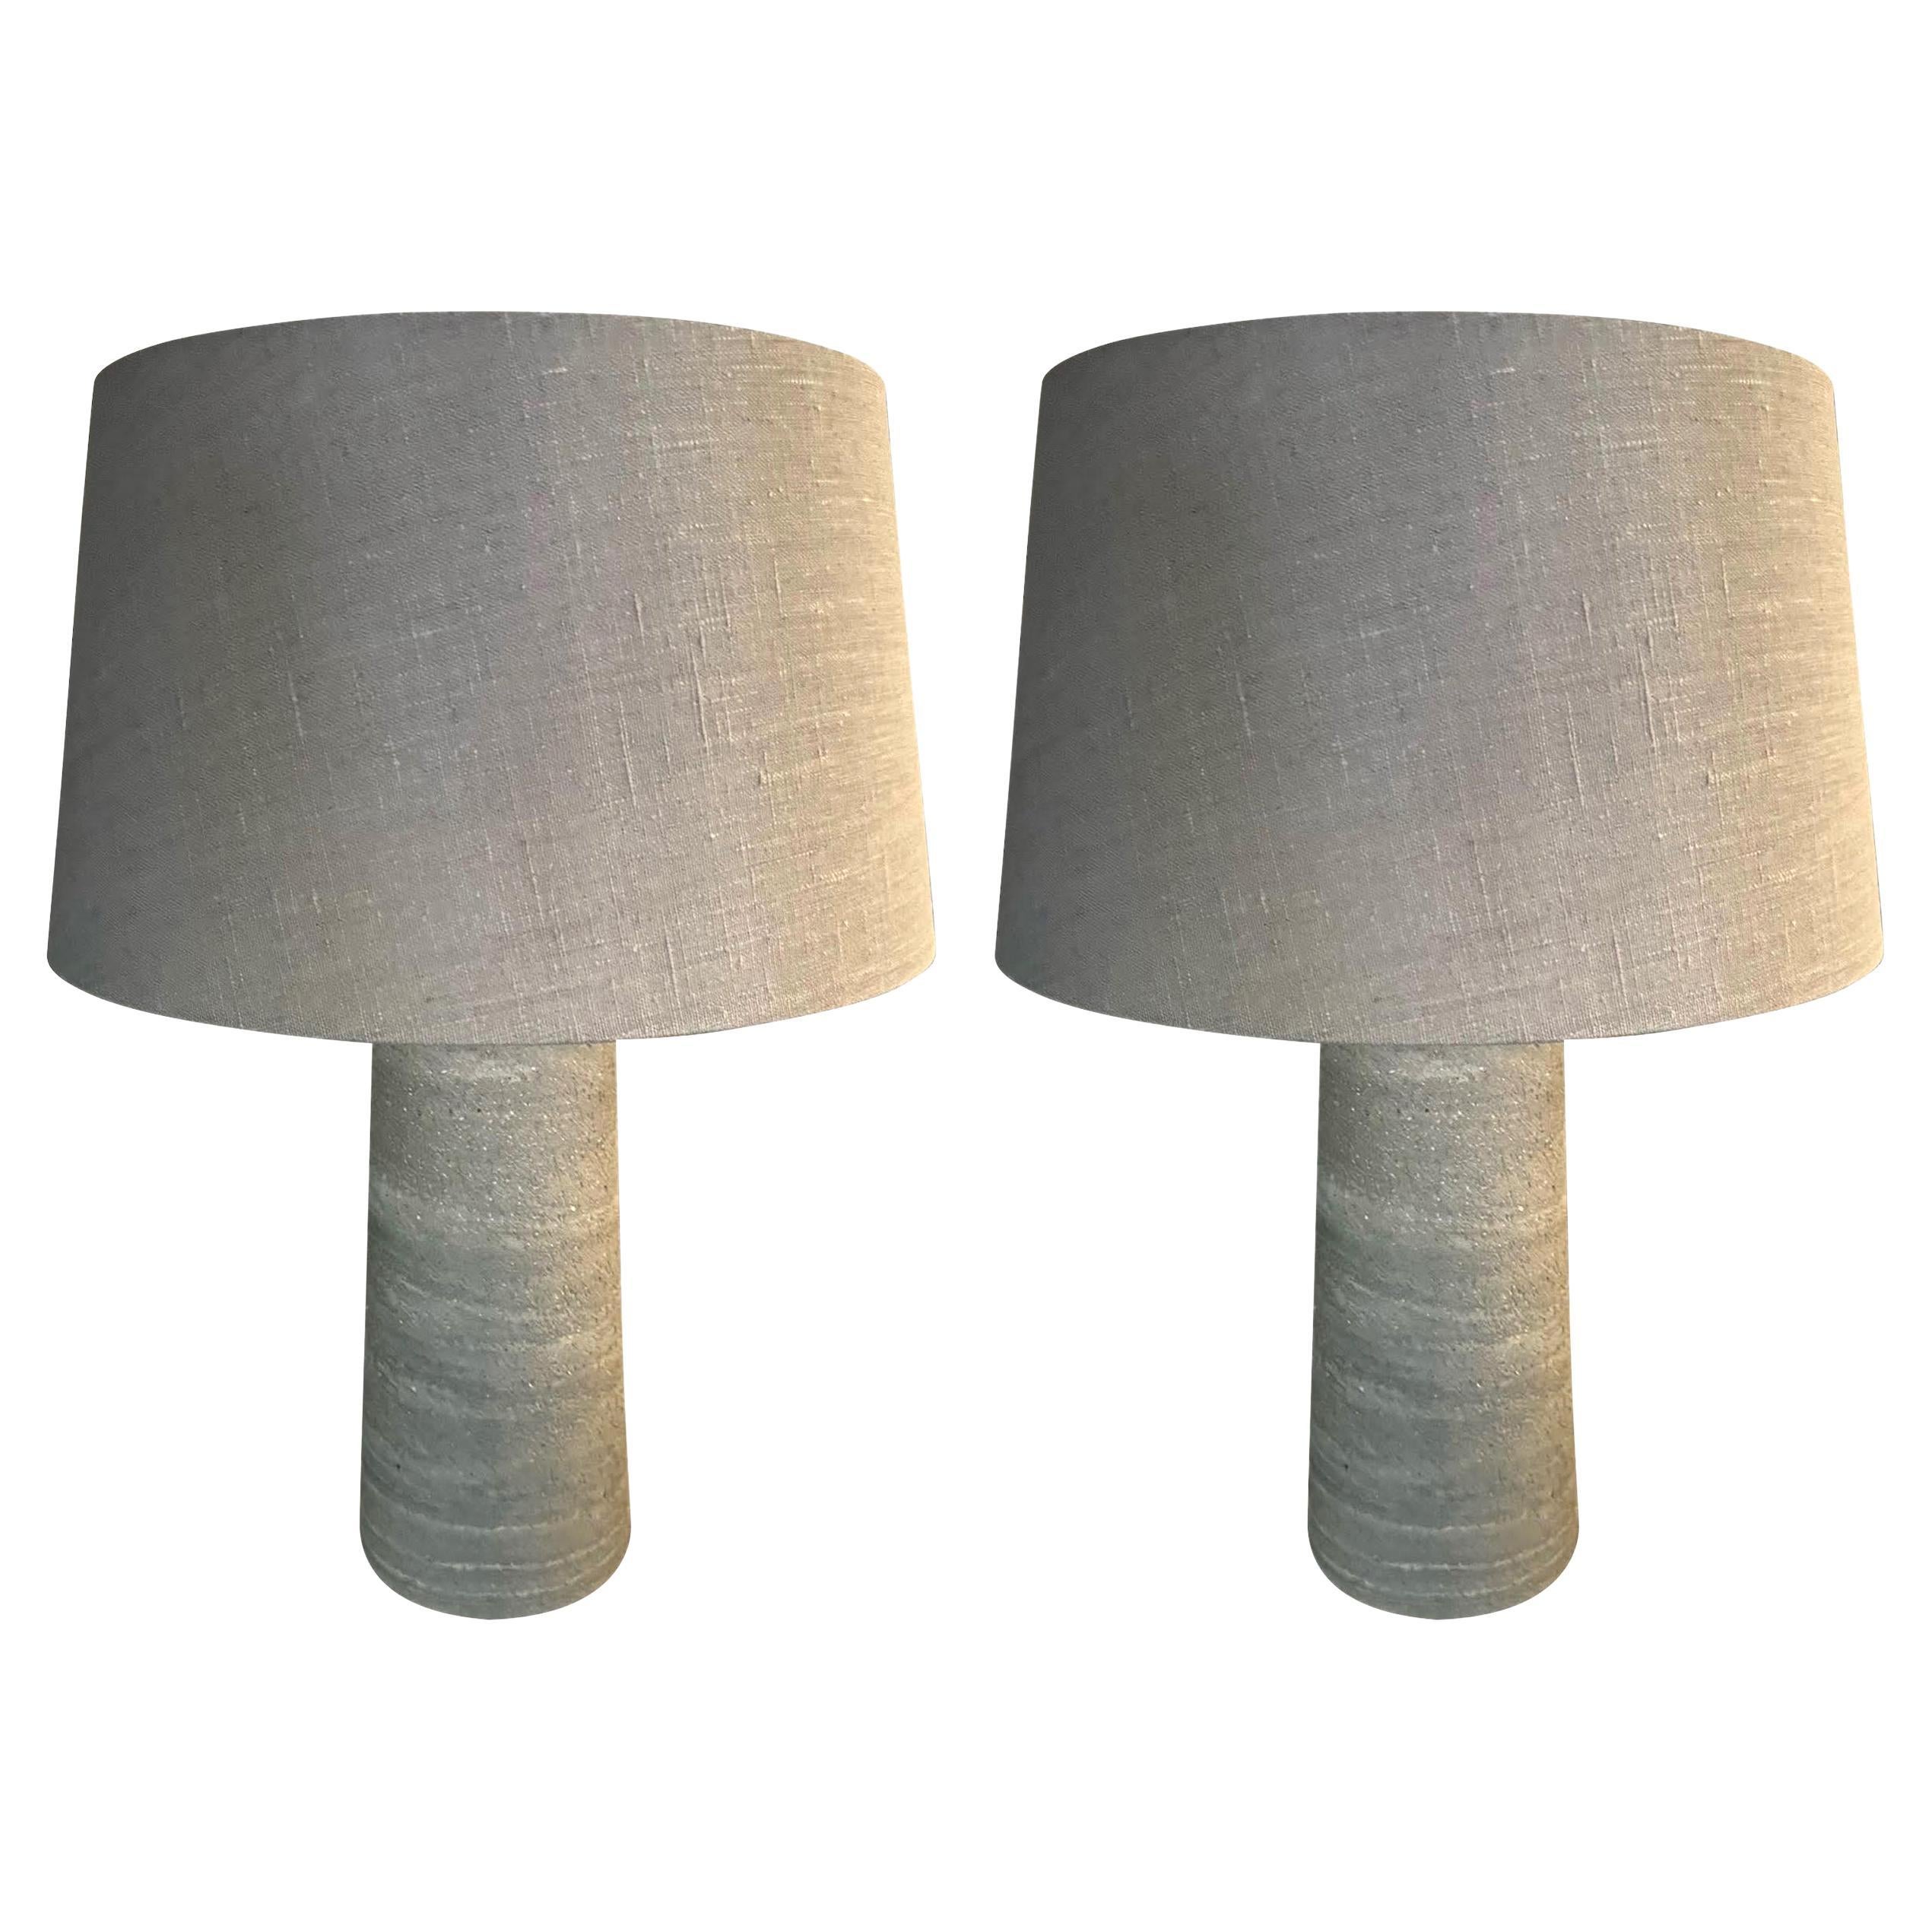 Stone Round Cylinder Shape Base Pair Lamps With Shades, Germany, Contemporary For Sale